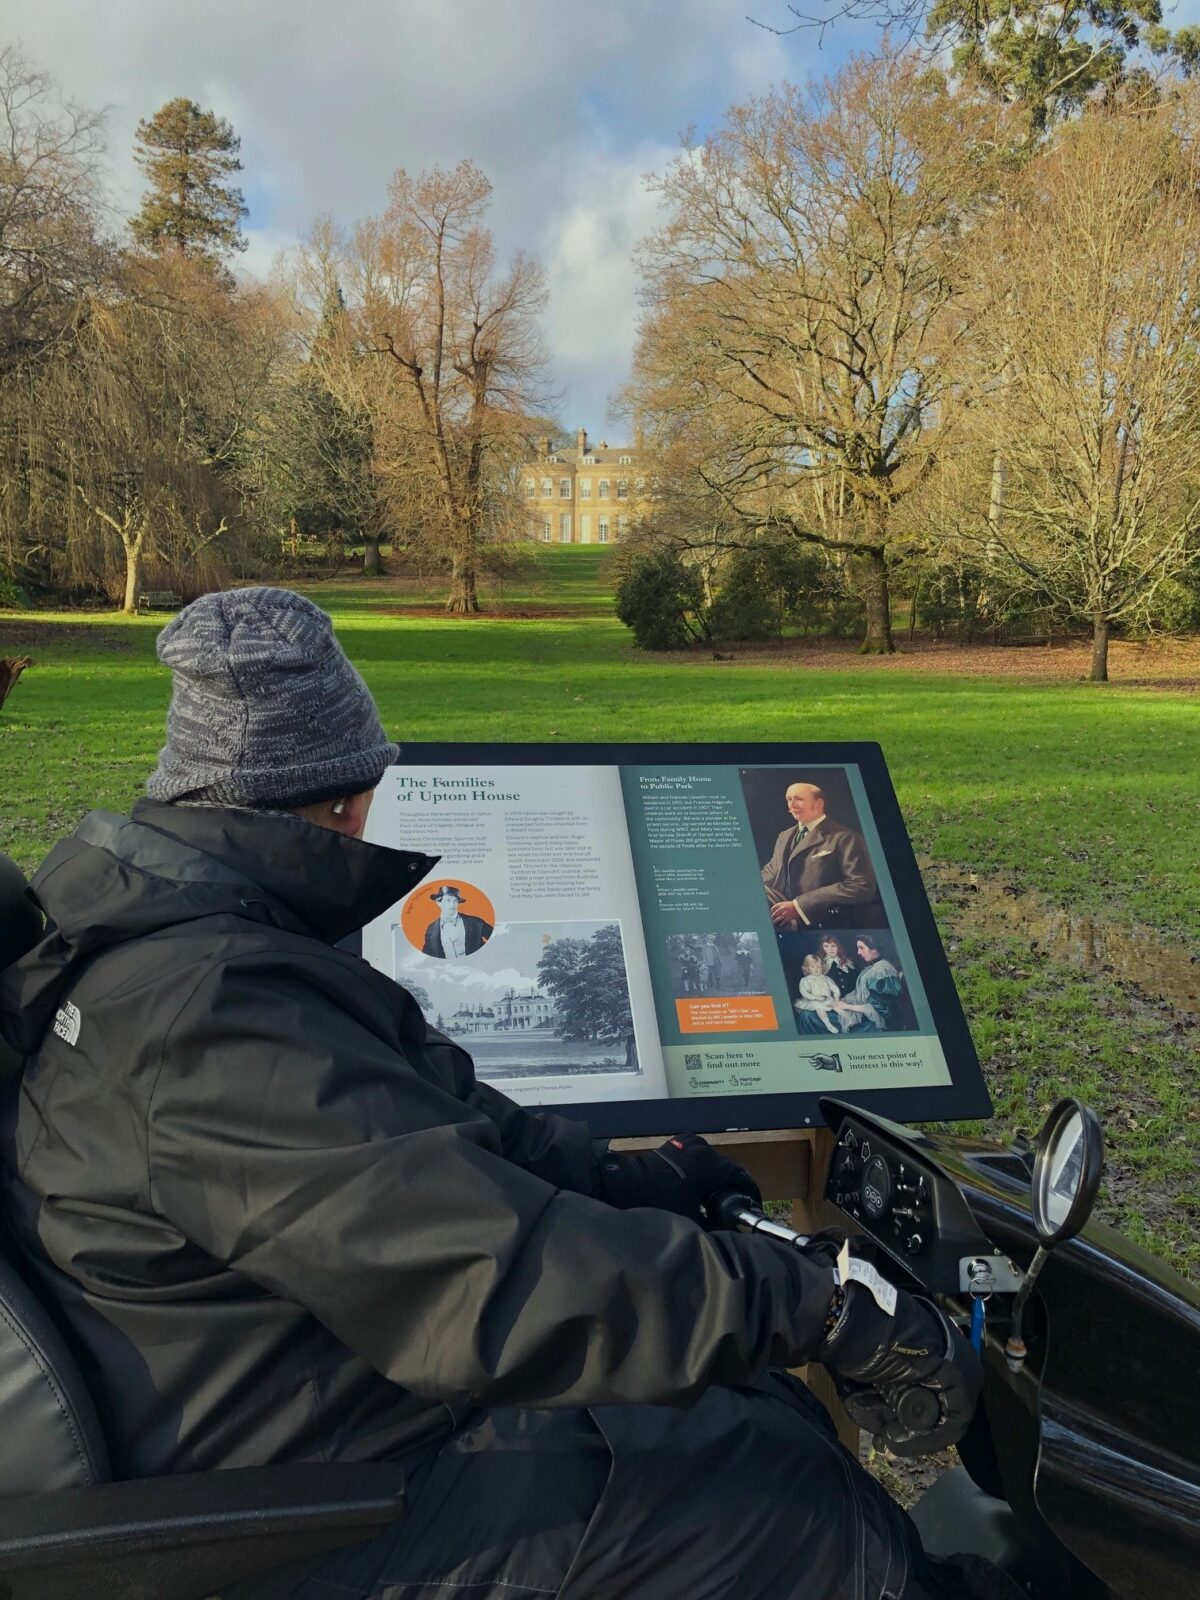 Mobility scooter user looking at information board with mansion house in the background at Upton Country Park